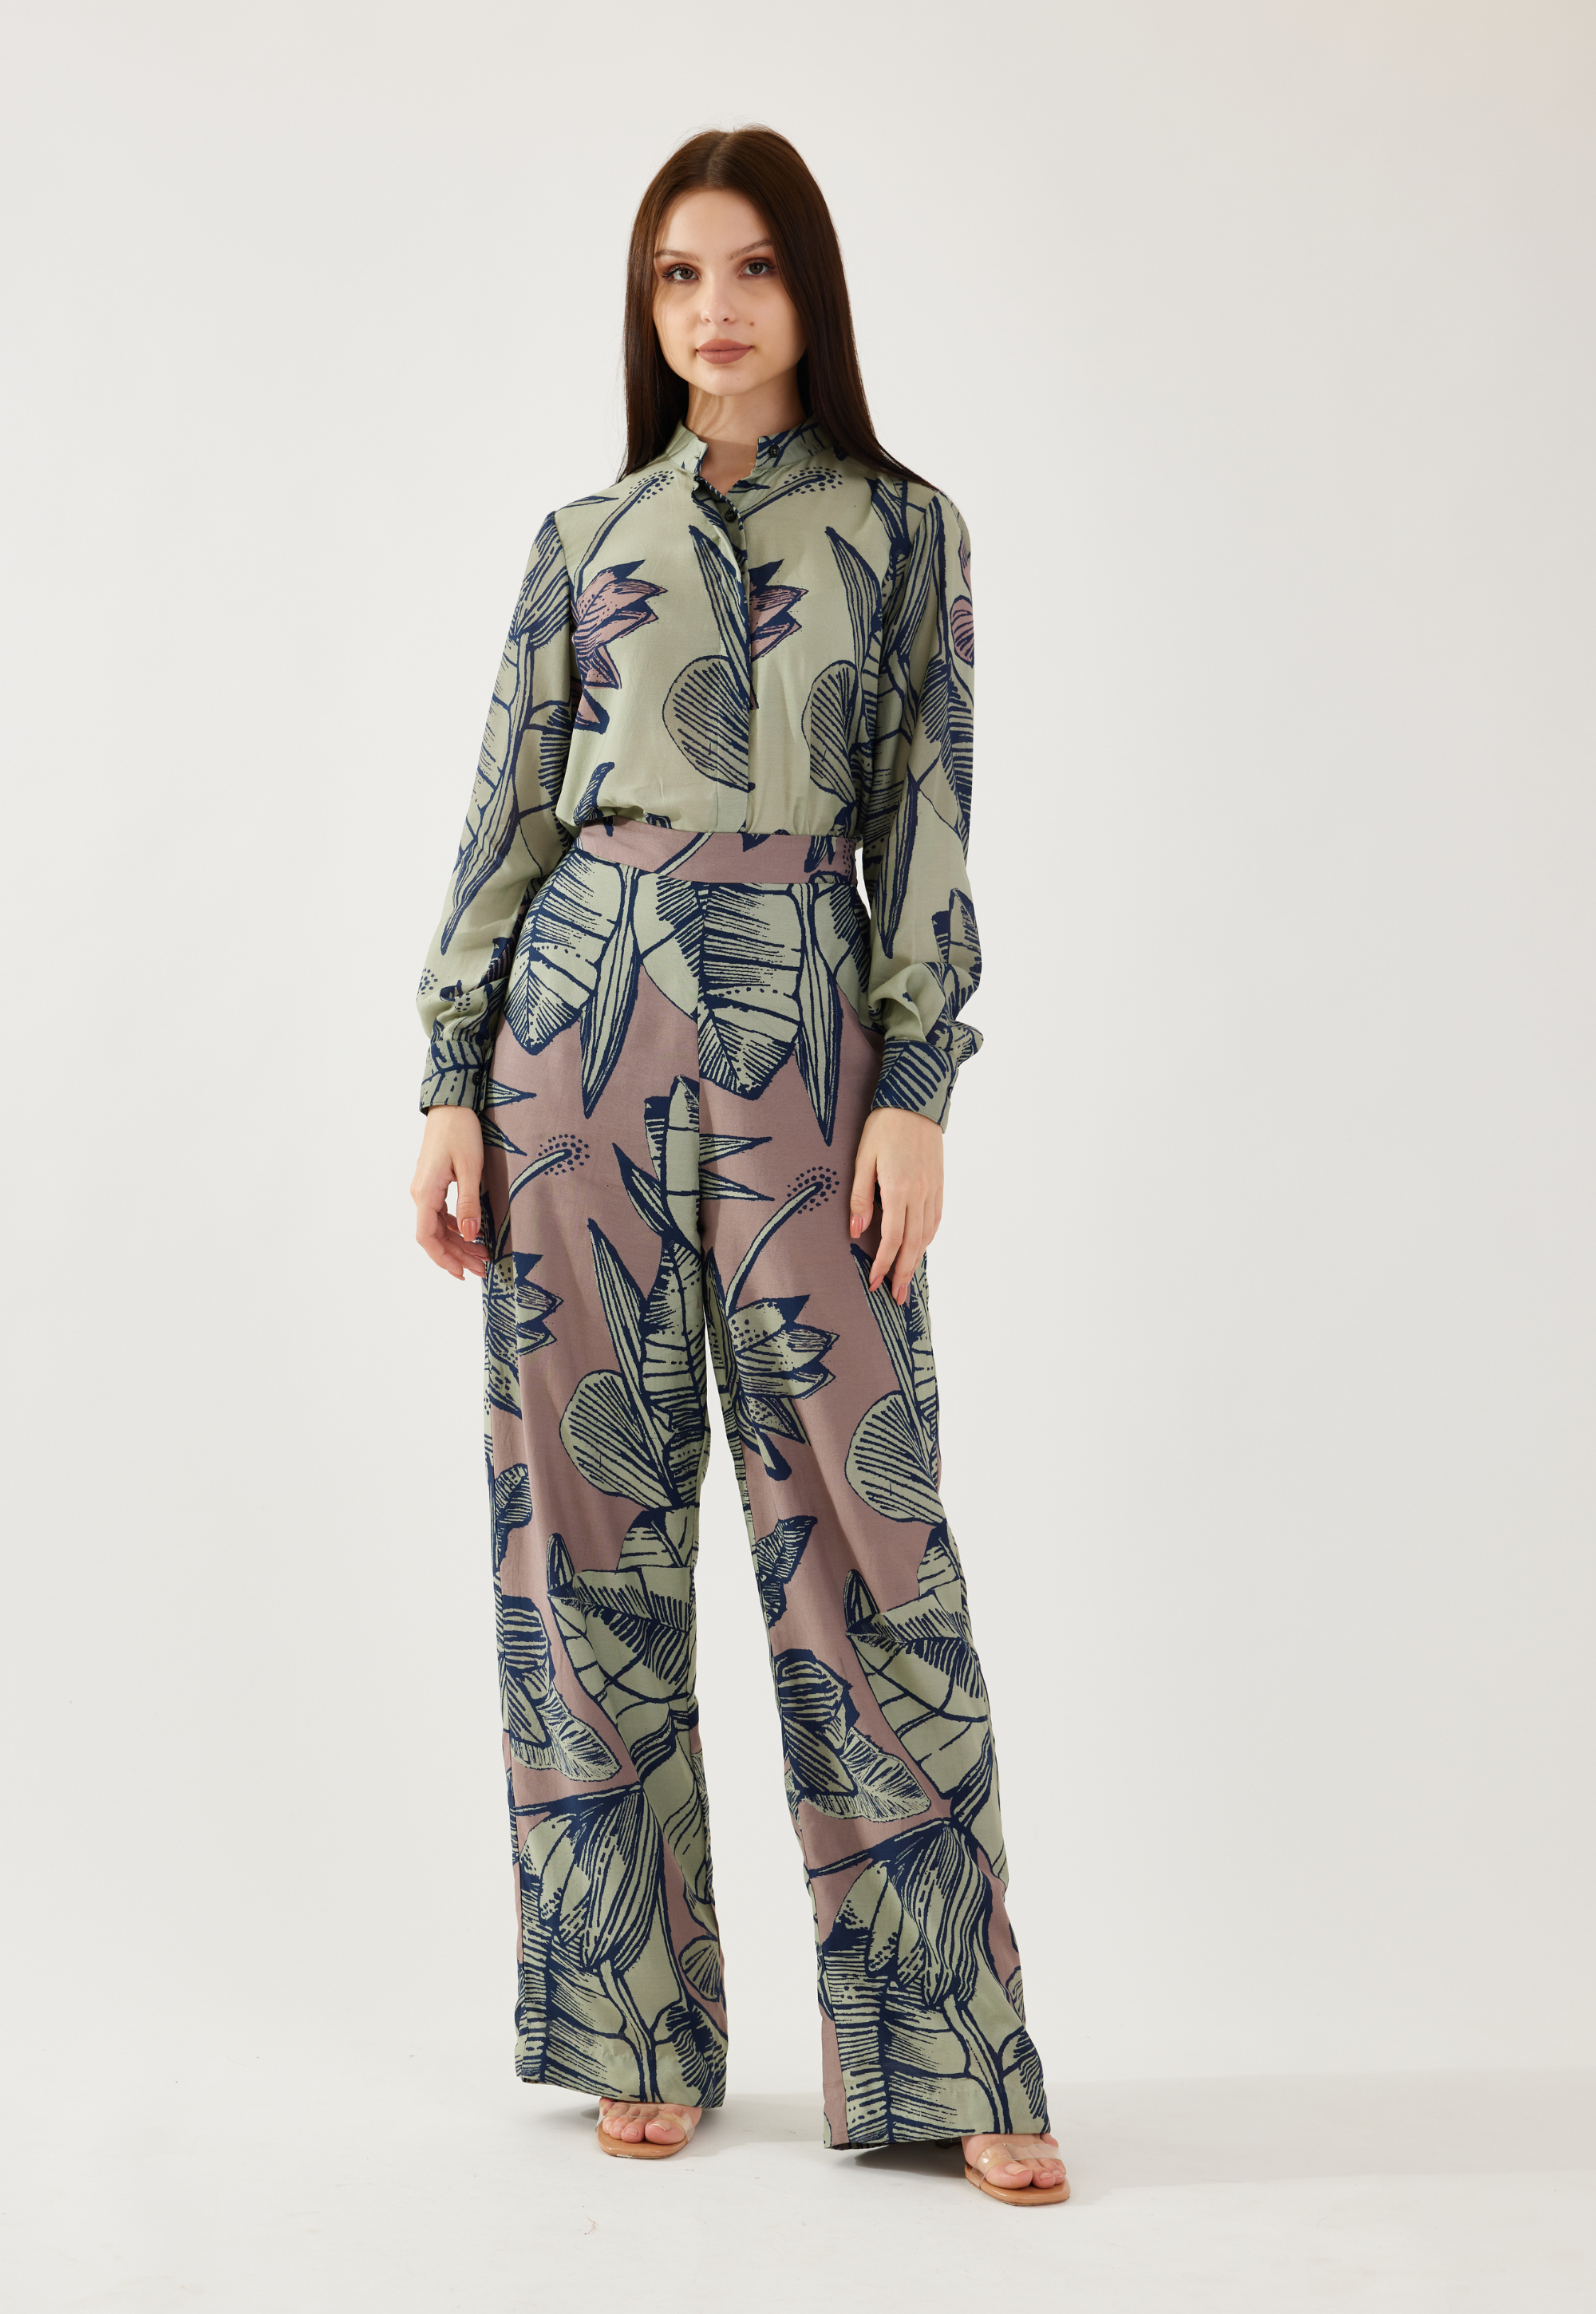 Olive and brown floral pants